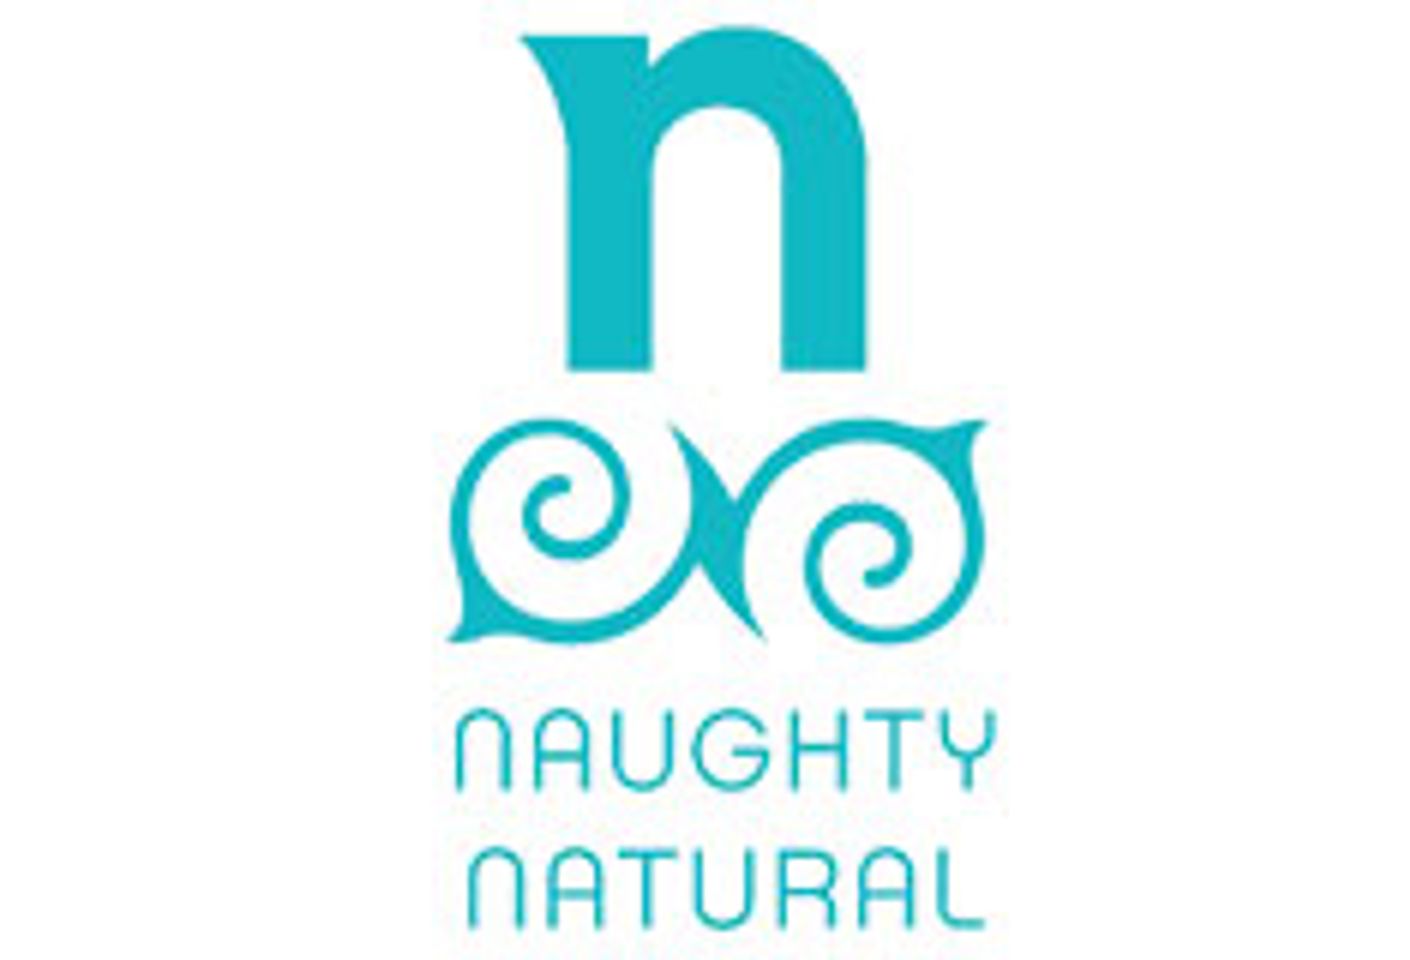 NaughtyNatural.com Releases Scene Starring Disabled Model Lyric Seal